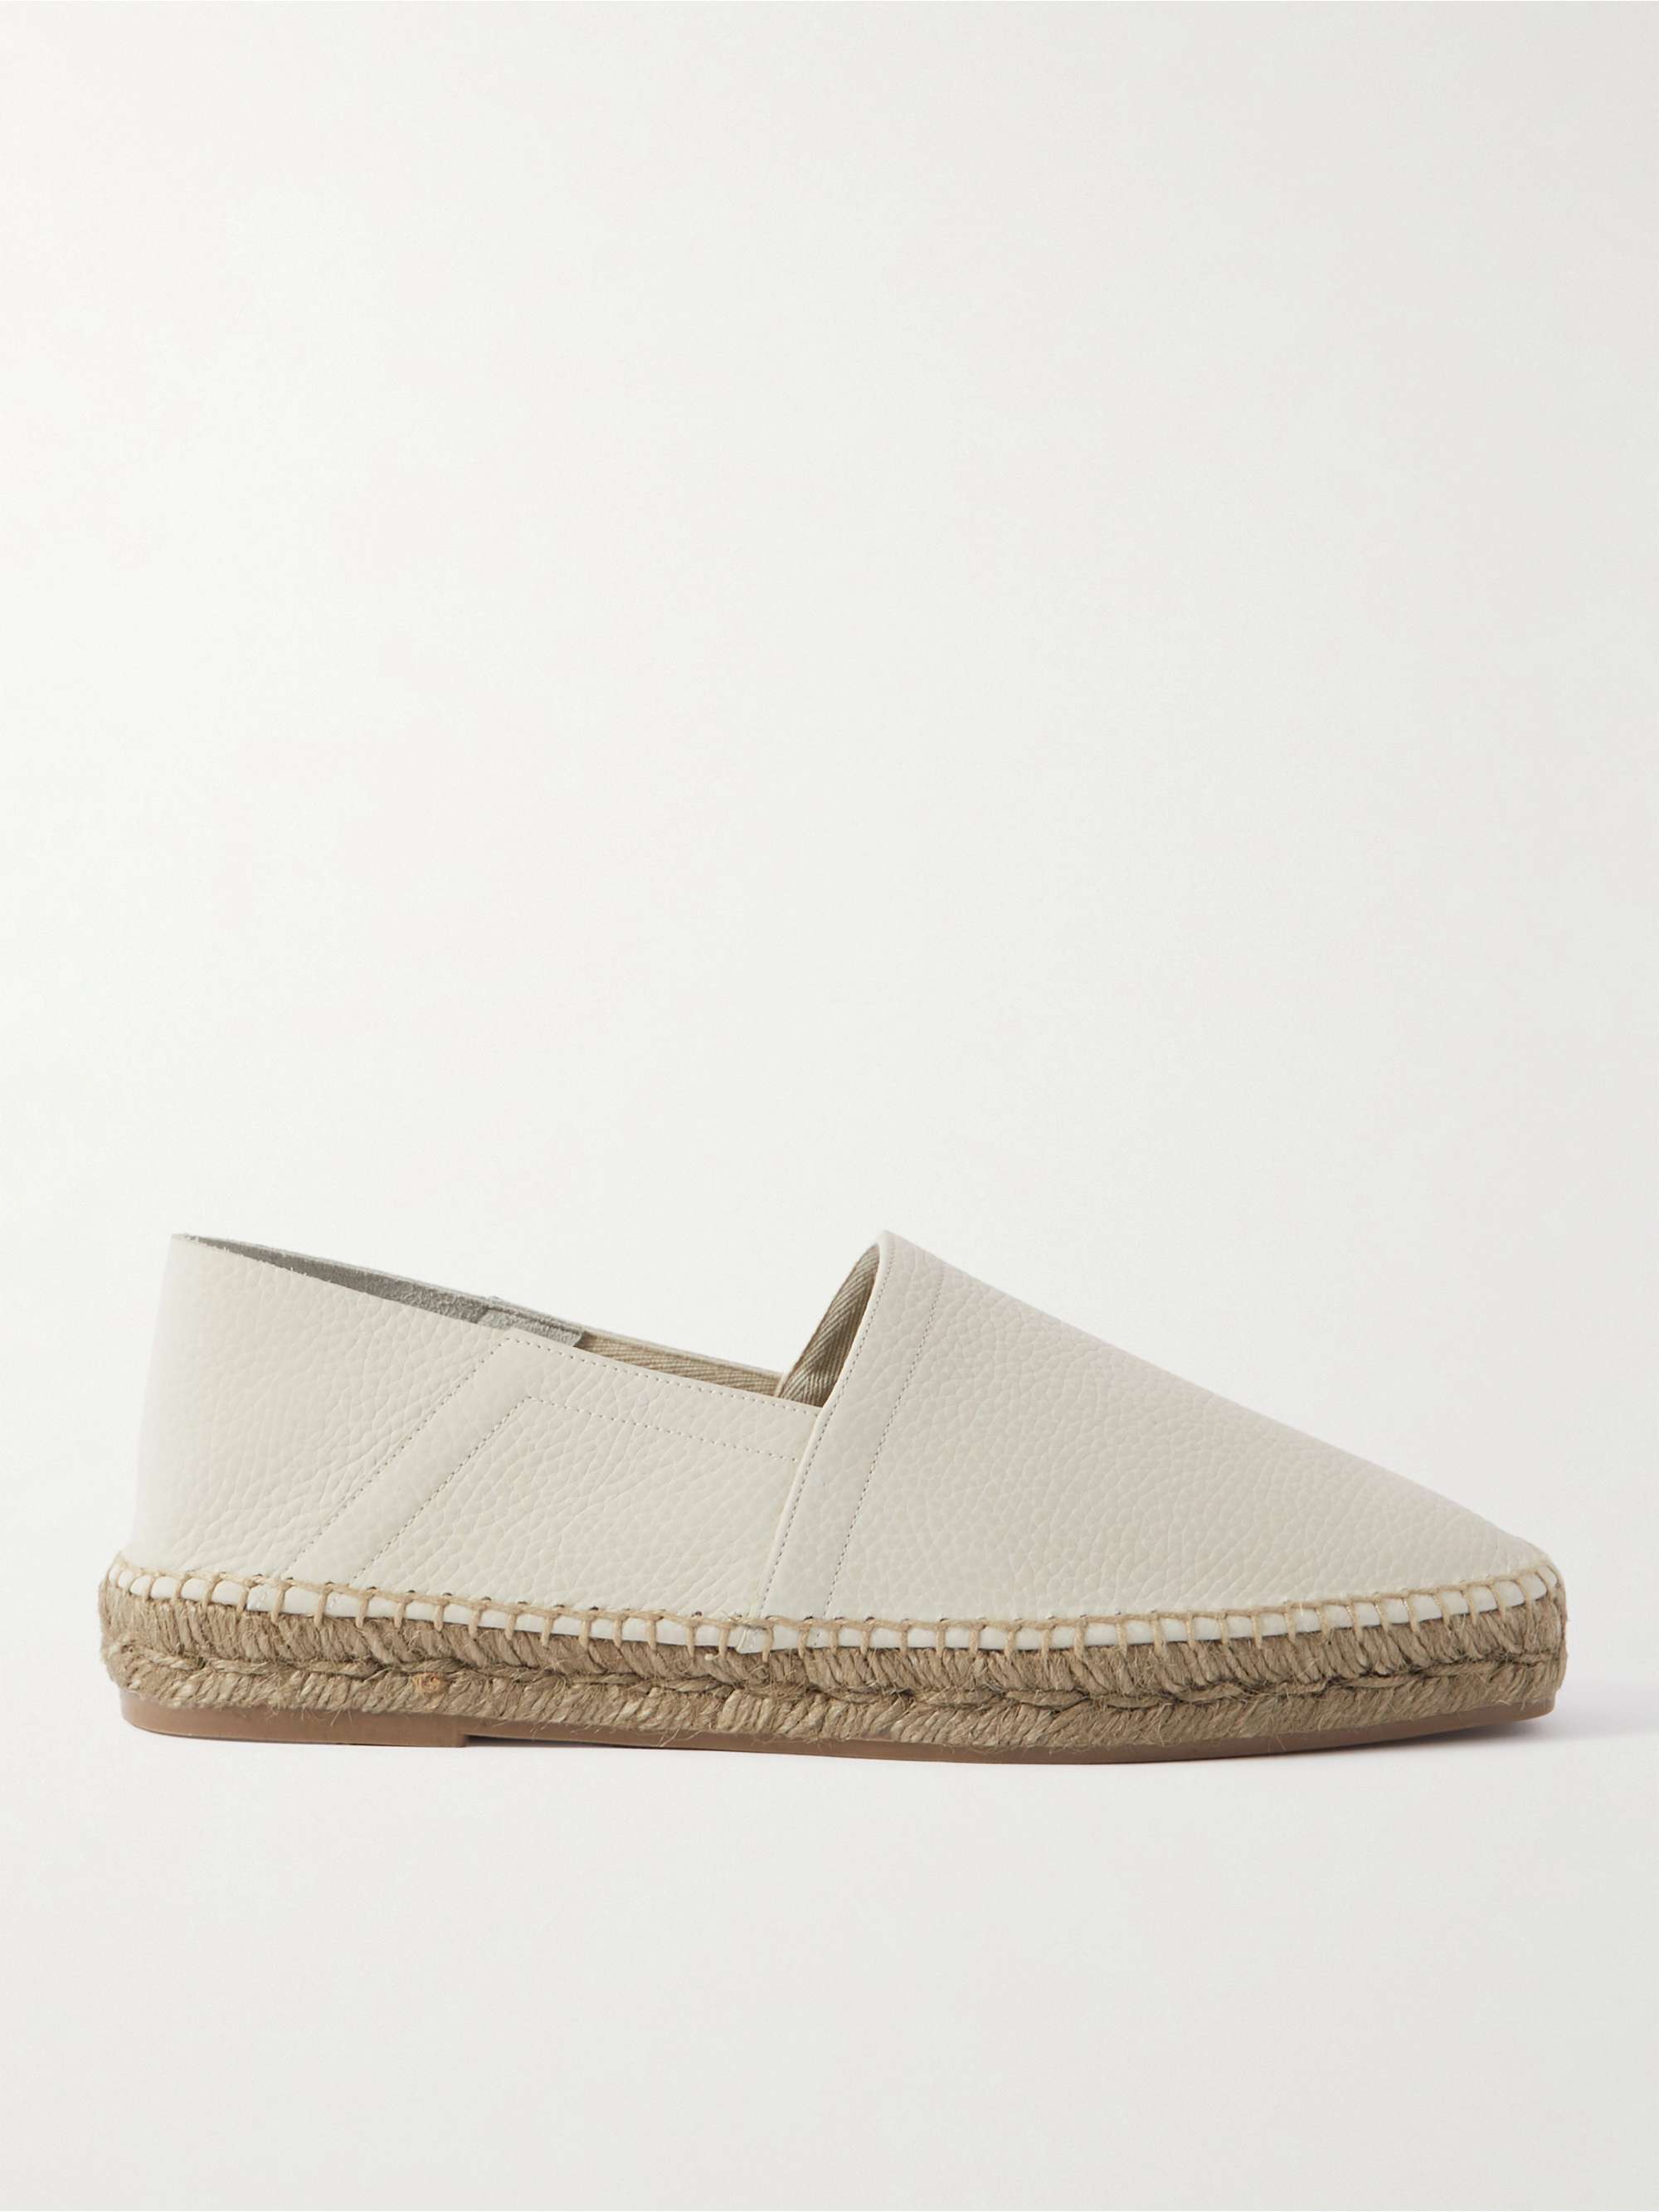 TOM FORD Barnes Textured-Leather Espadrilles